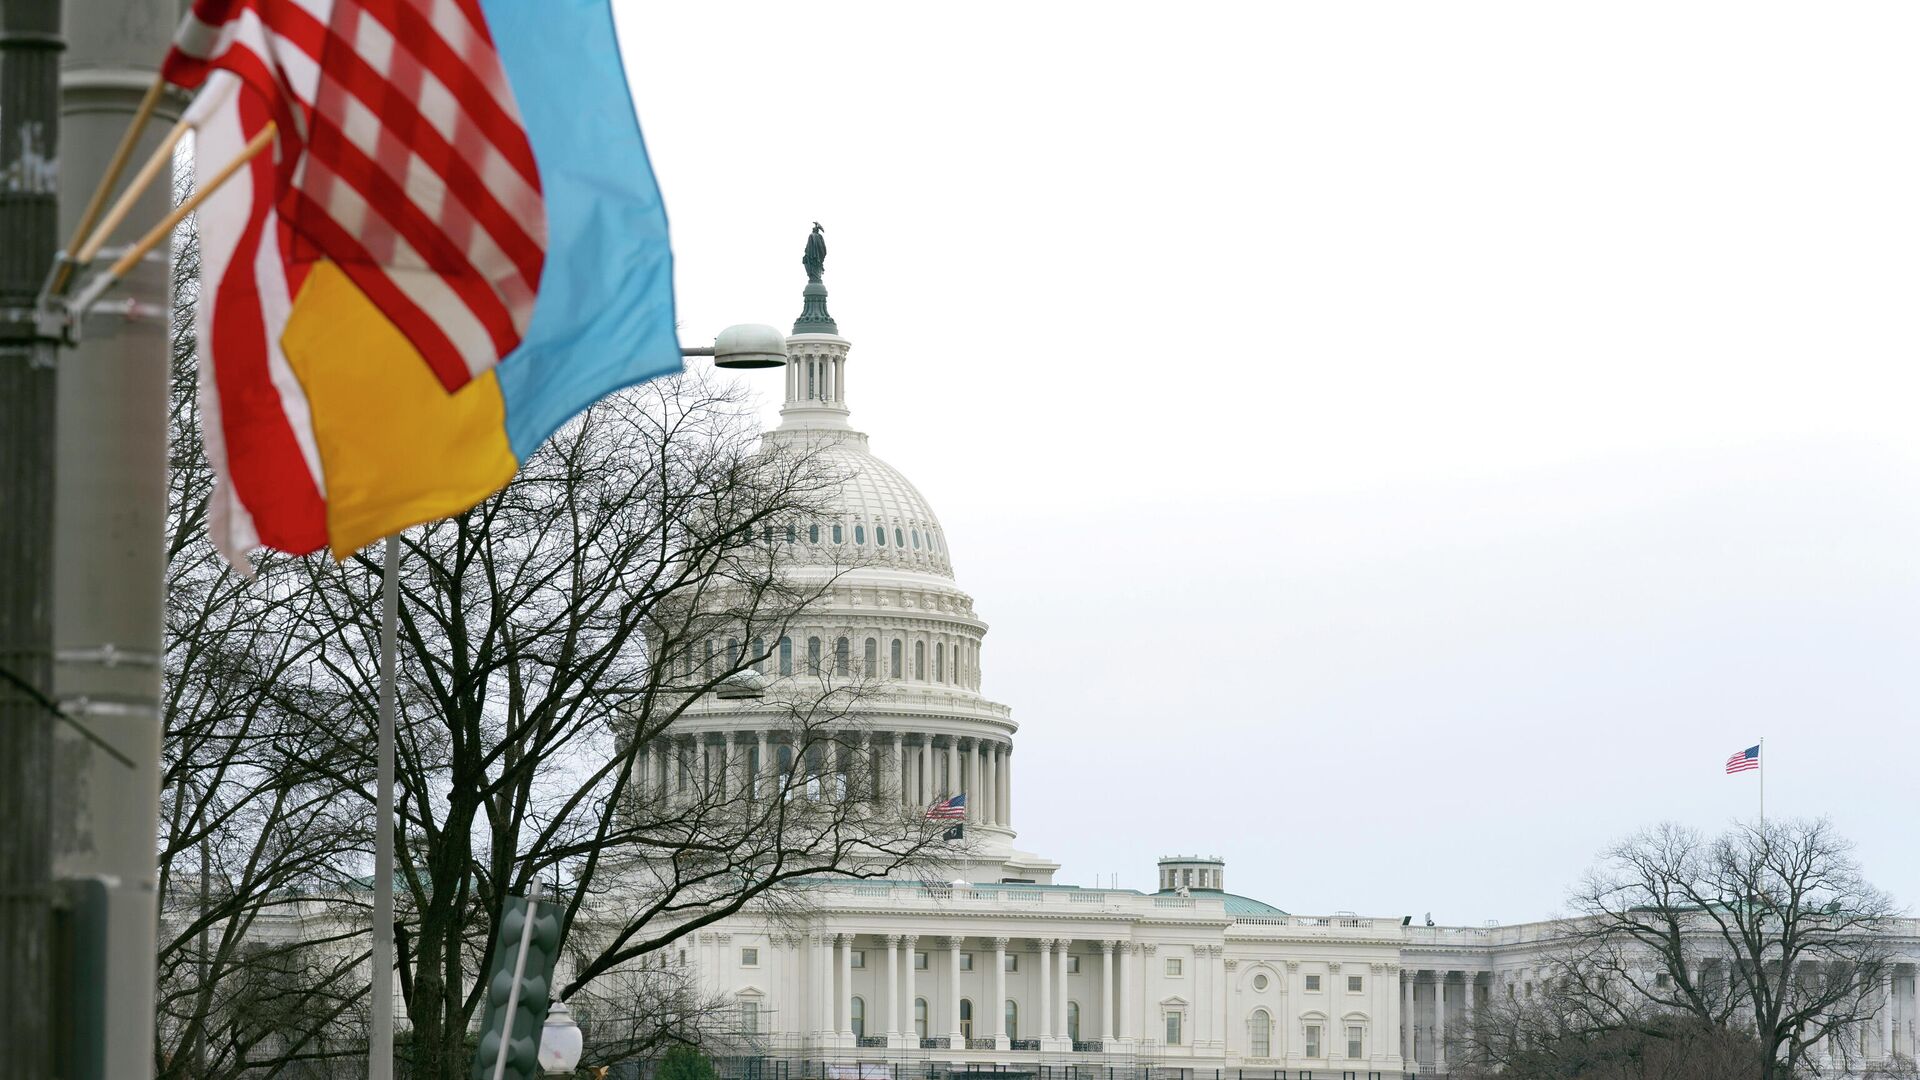 The U.S. Capitol is seen behind the U.S. flag, Ukrainian flag and the flag of Washington, D.C., in Washington, Tuesday, March, 1, 2022. President Joe Biden will deliver his first State of the Union address at a precipitous moment for the nation. Biden is aiming to navigate the country out of a pandemic, reboot his stalled domestic agenda and confront Russia’s aggression. - Sputnik International, 1920, 28.04.2022